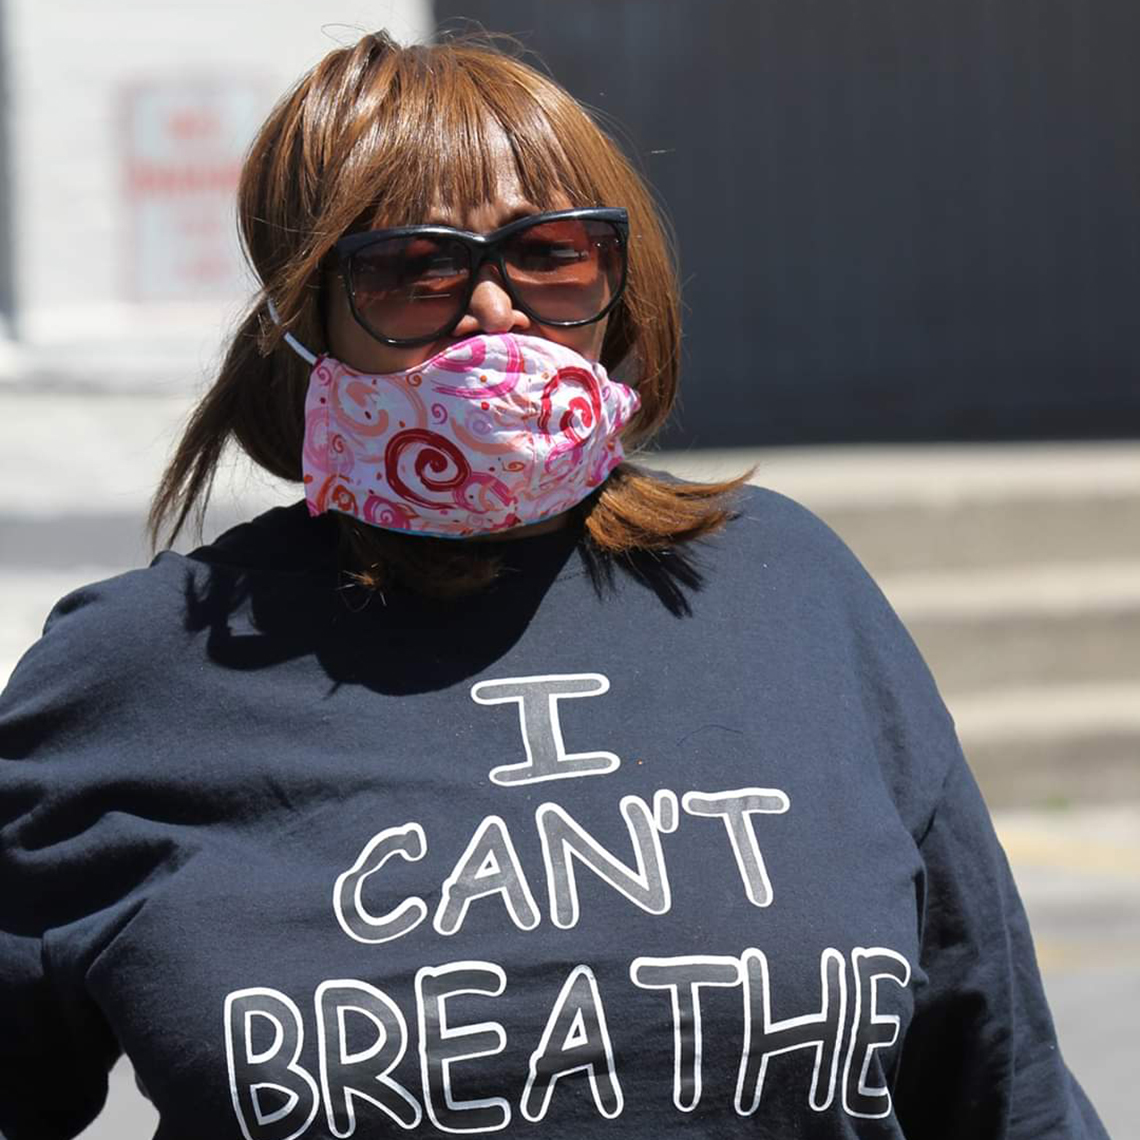 rhonda mathies wearing a face mask and shirt that says i cant breathe at a protest